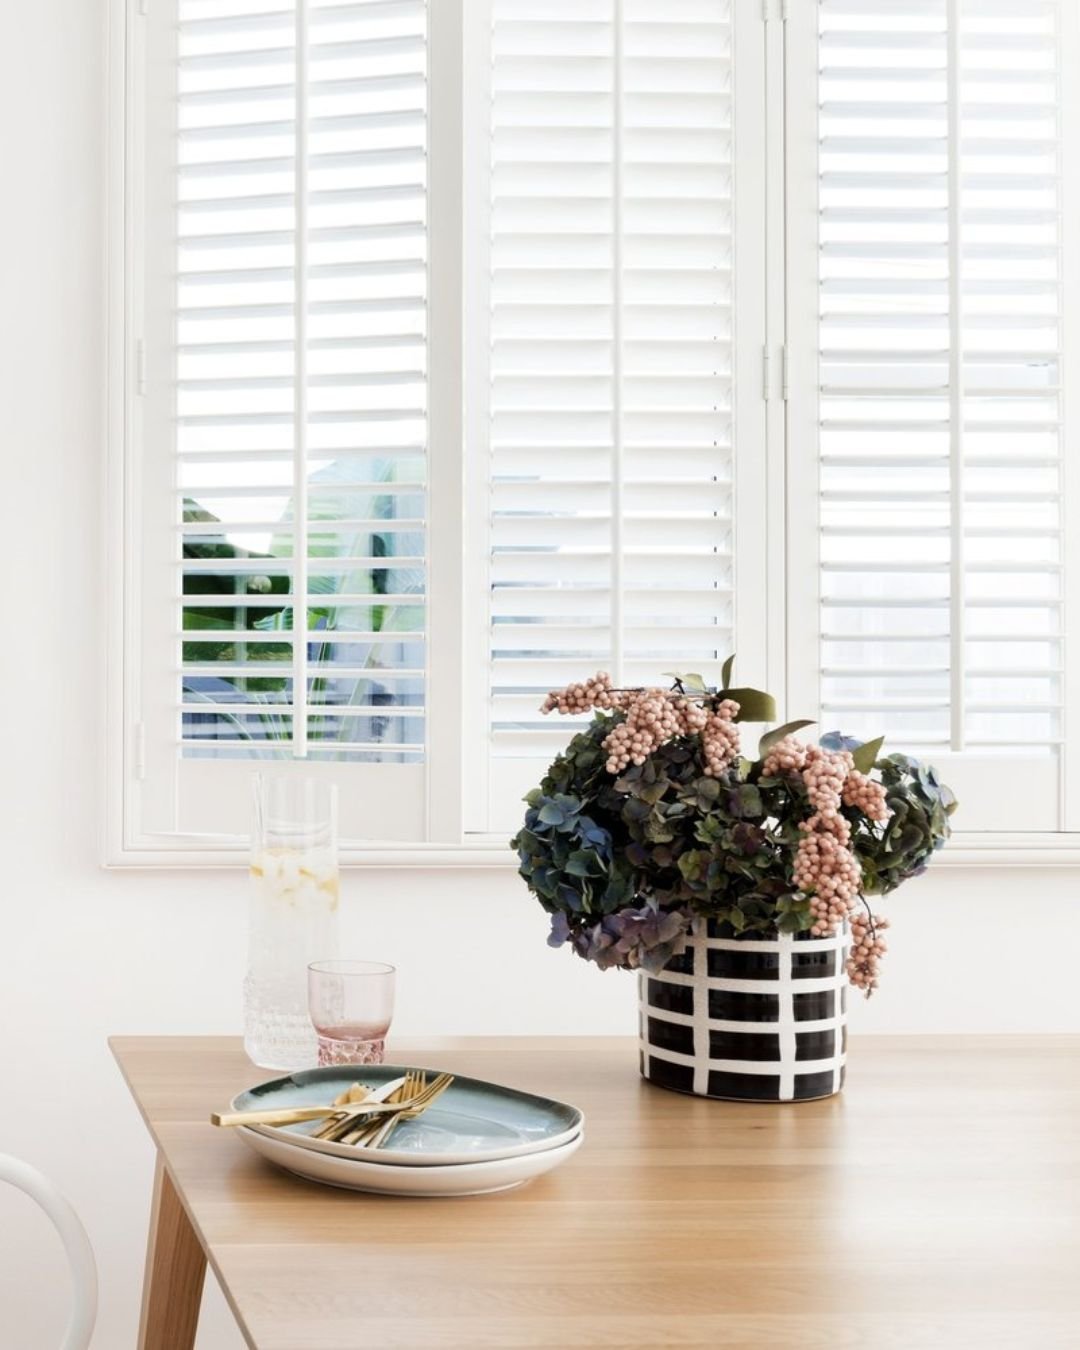 Custom made plantation shutters are a timeless, classic window treatment. 

At Brax we have both Timber Shutters and a range of PVC and Polyresin shutters.

Find out more about our plantation shutters and range of window treatments via the link in bi